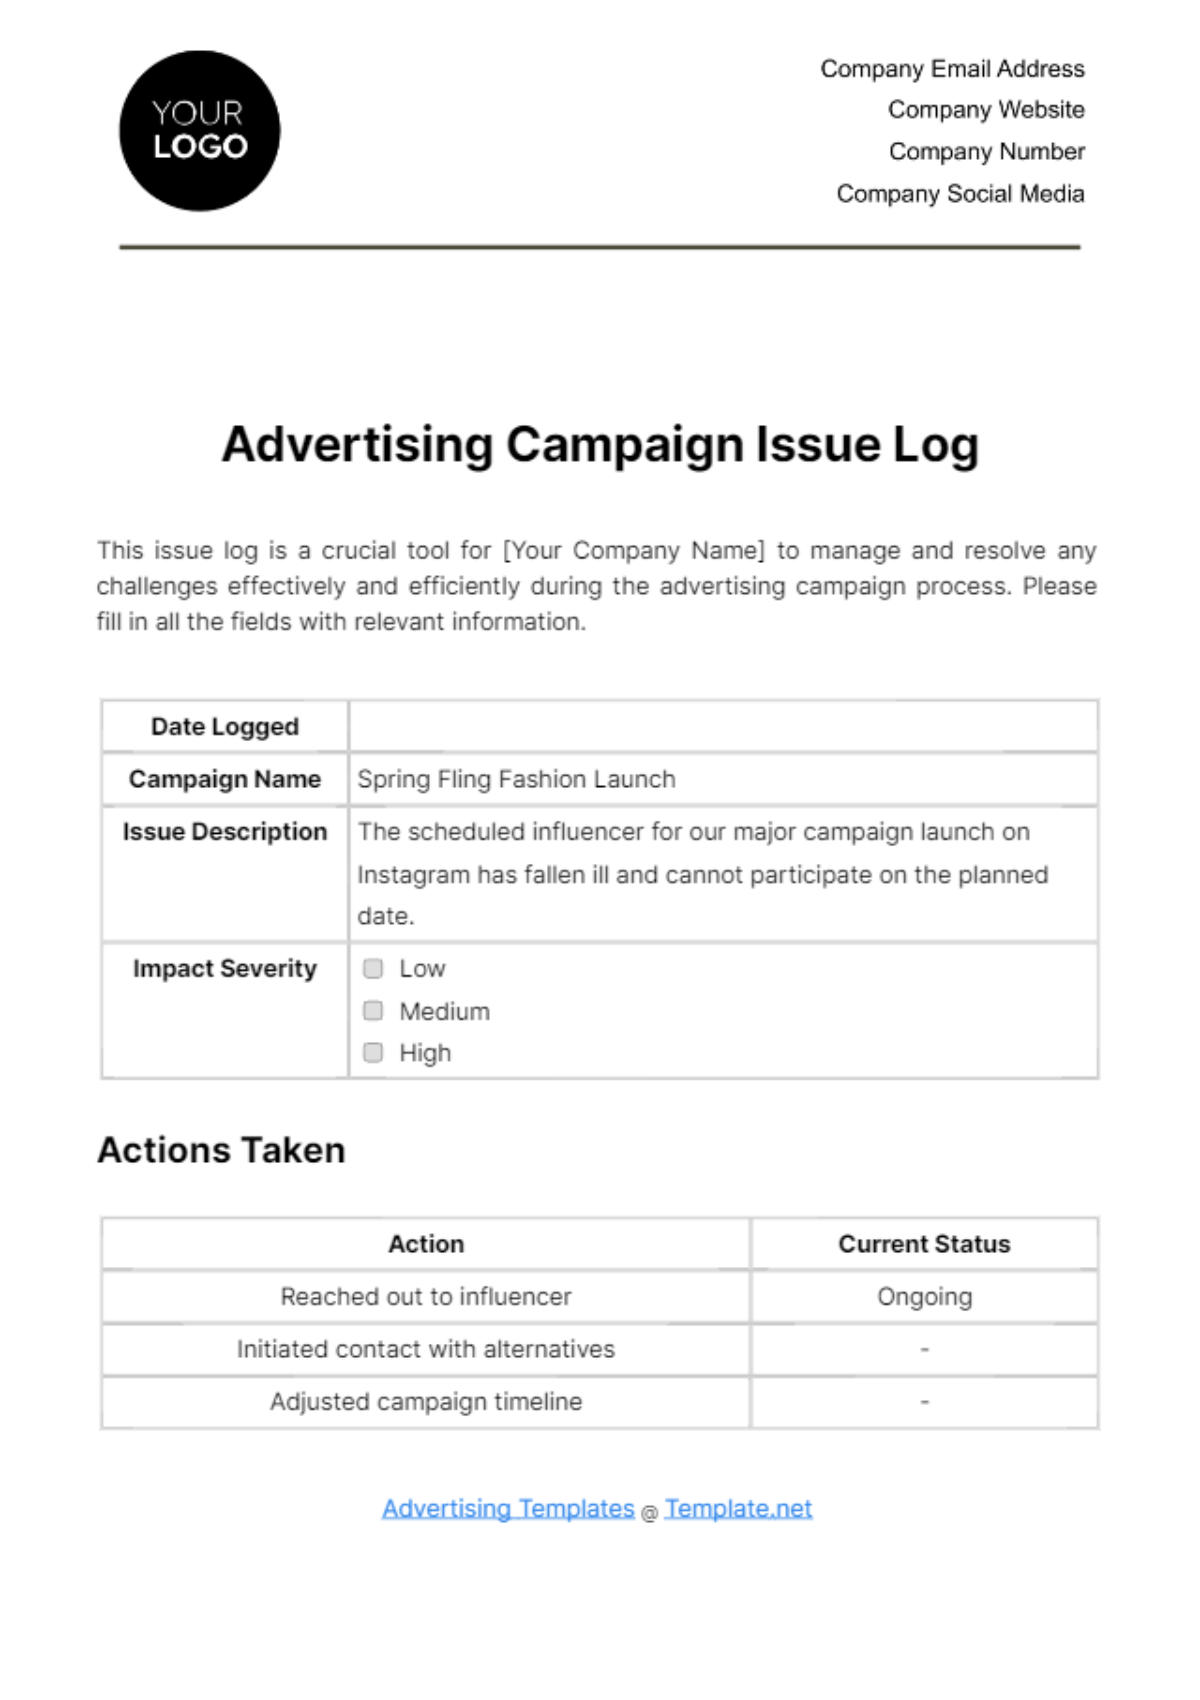 Free Advertising Campaign Issue Log Template